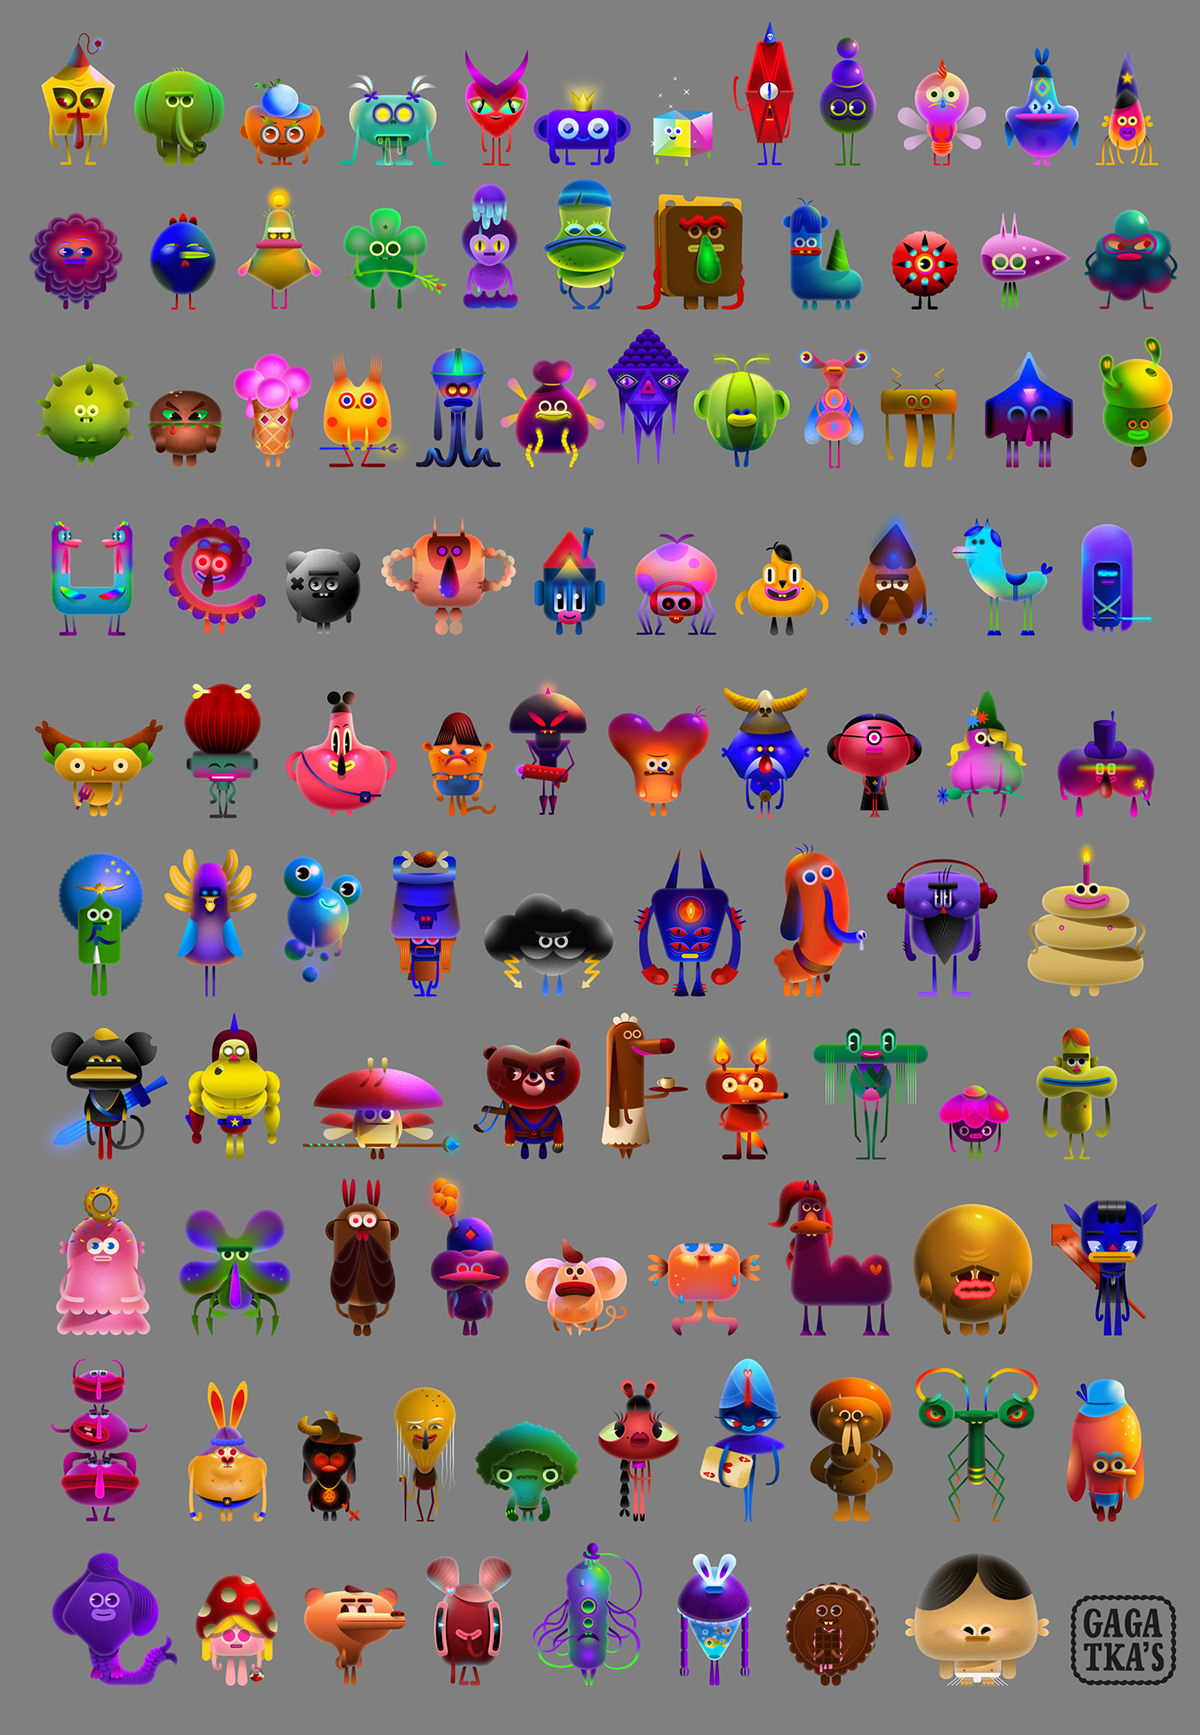 RGB.vn_100 Affinity Designer characters by Agata Karelus